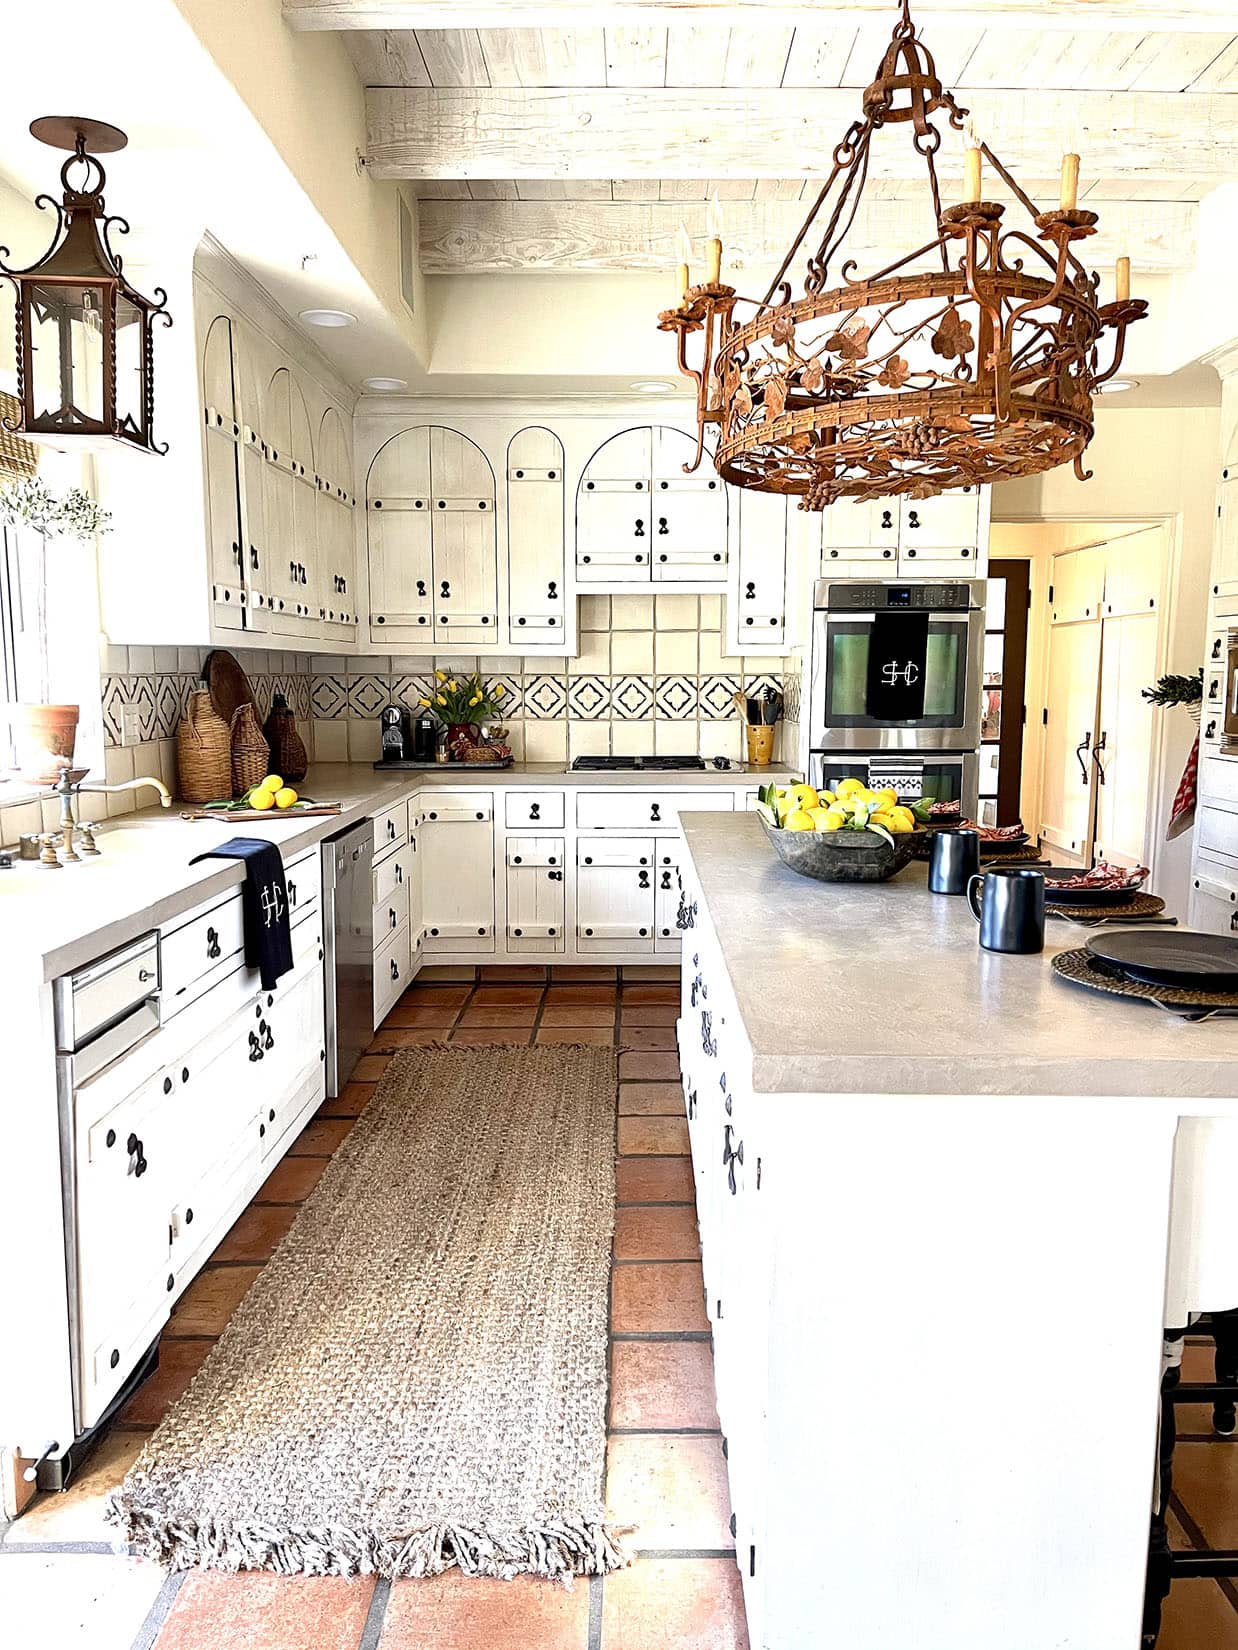 cindy hattersley's spanish colonial kitchen